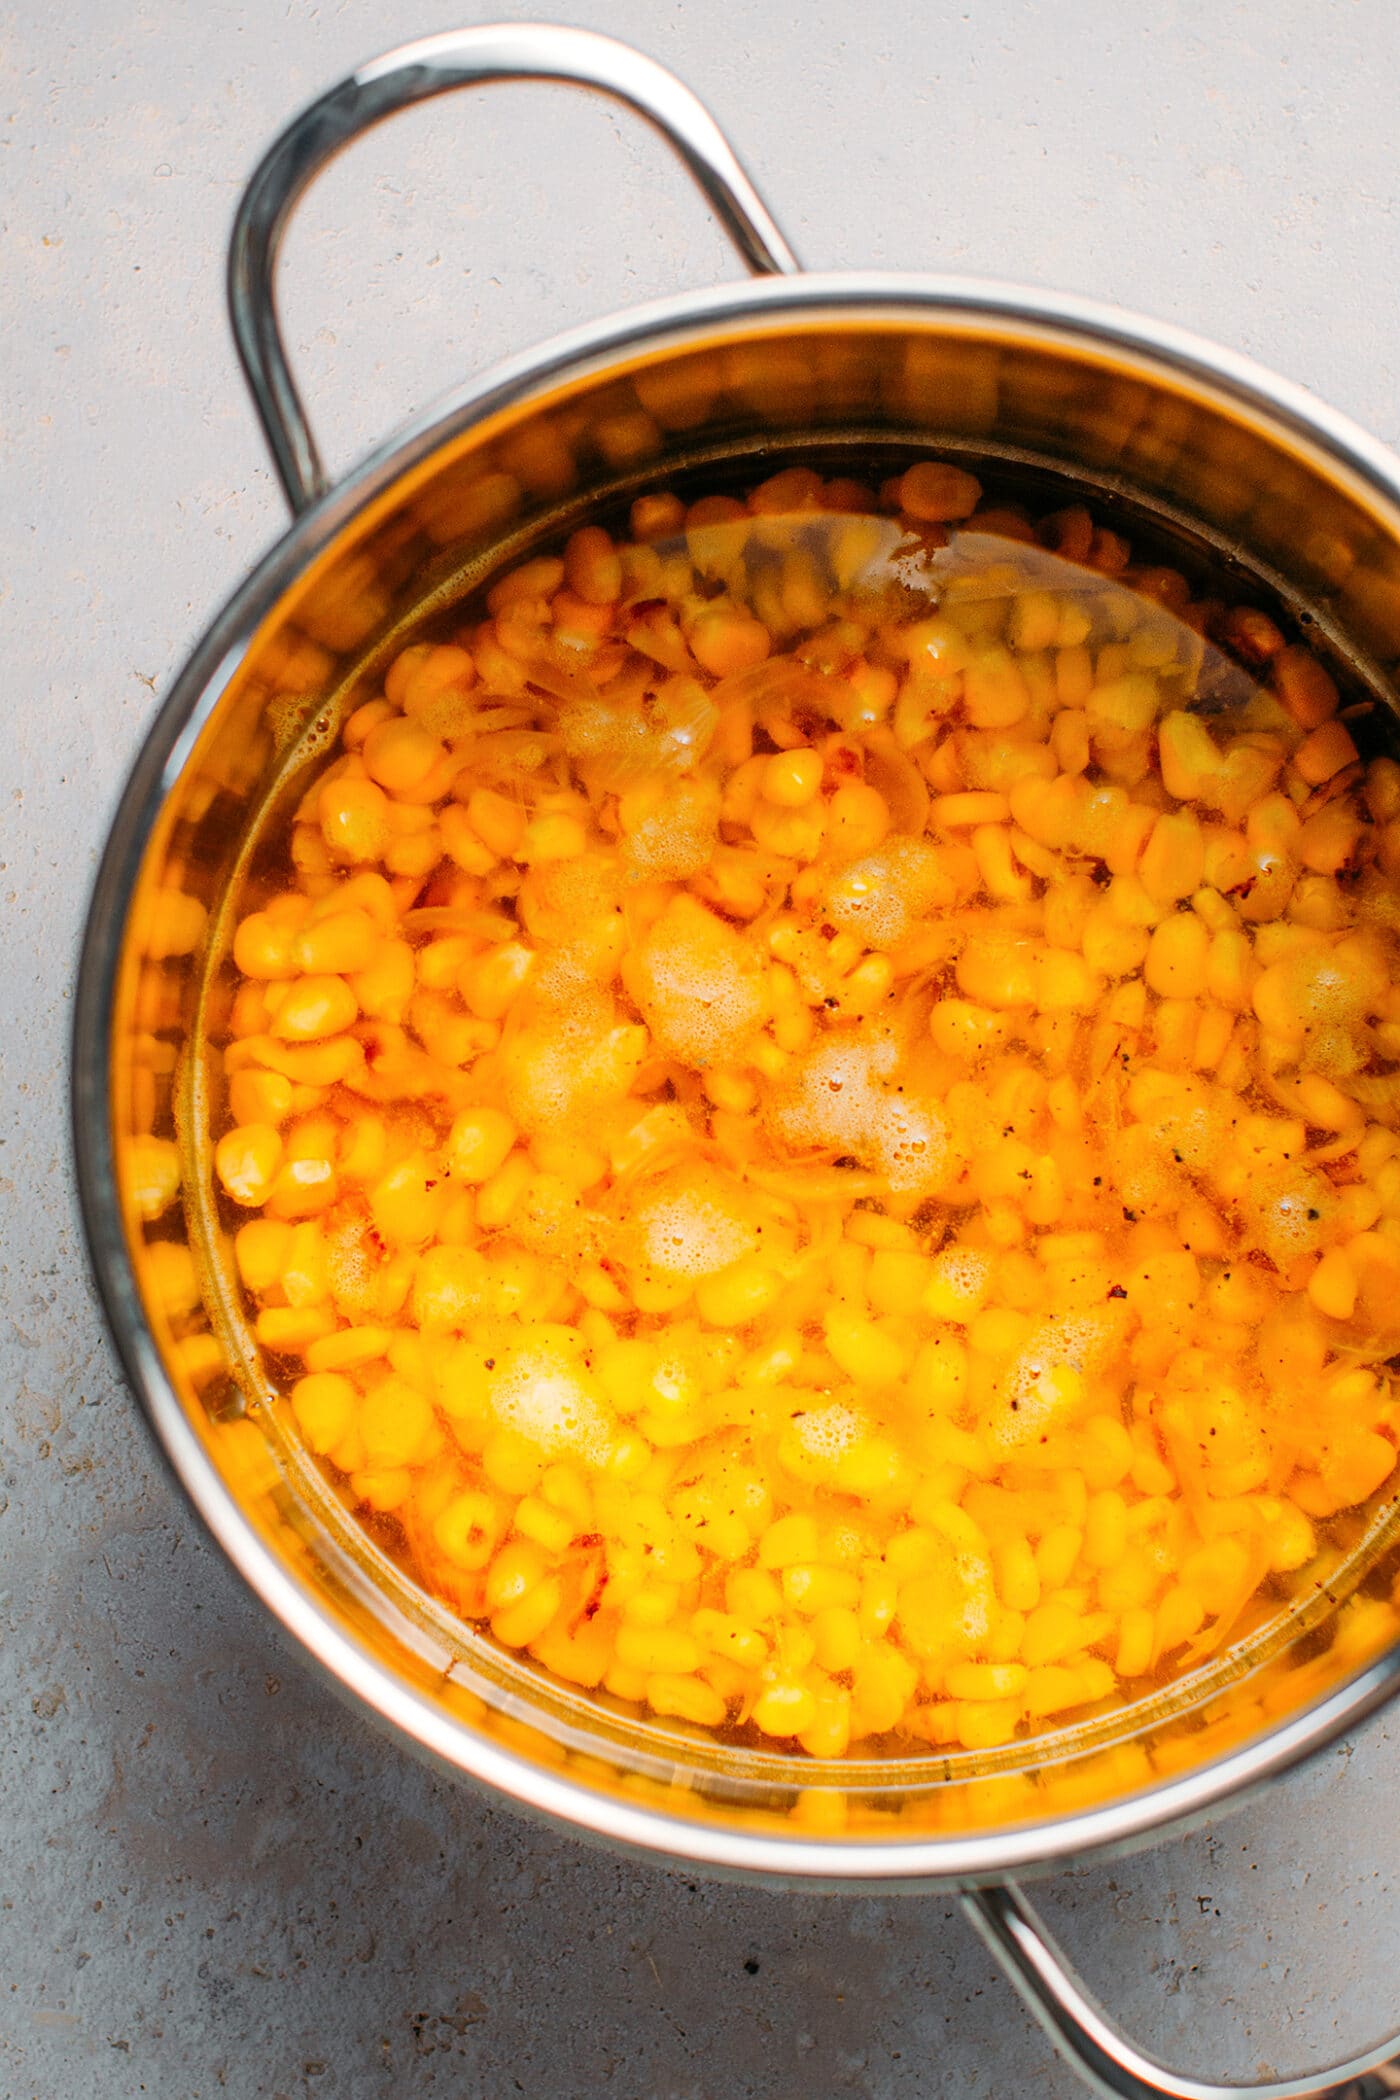 Cooking corn in a pot to make corn soup.